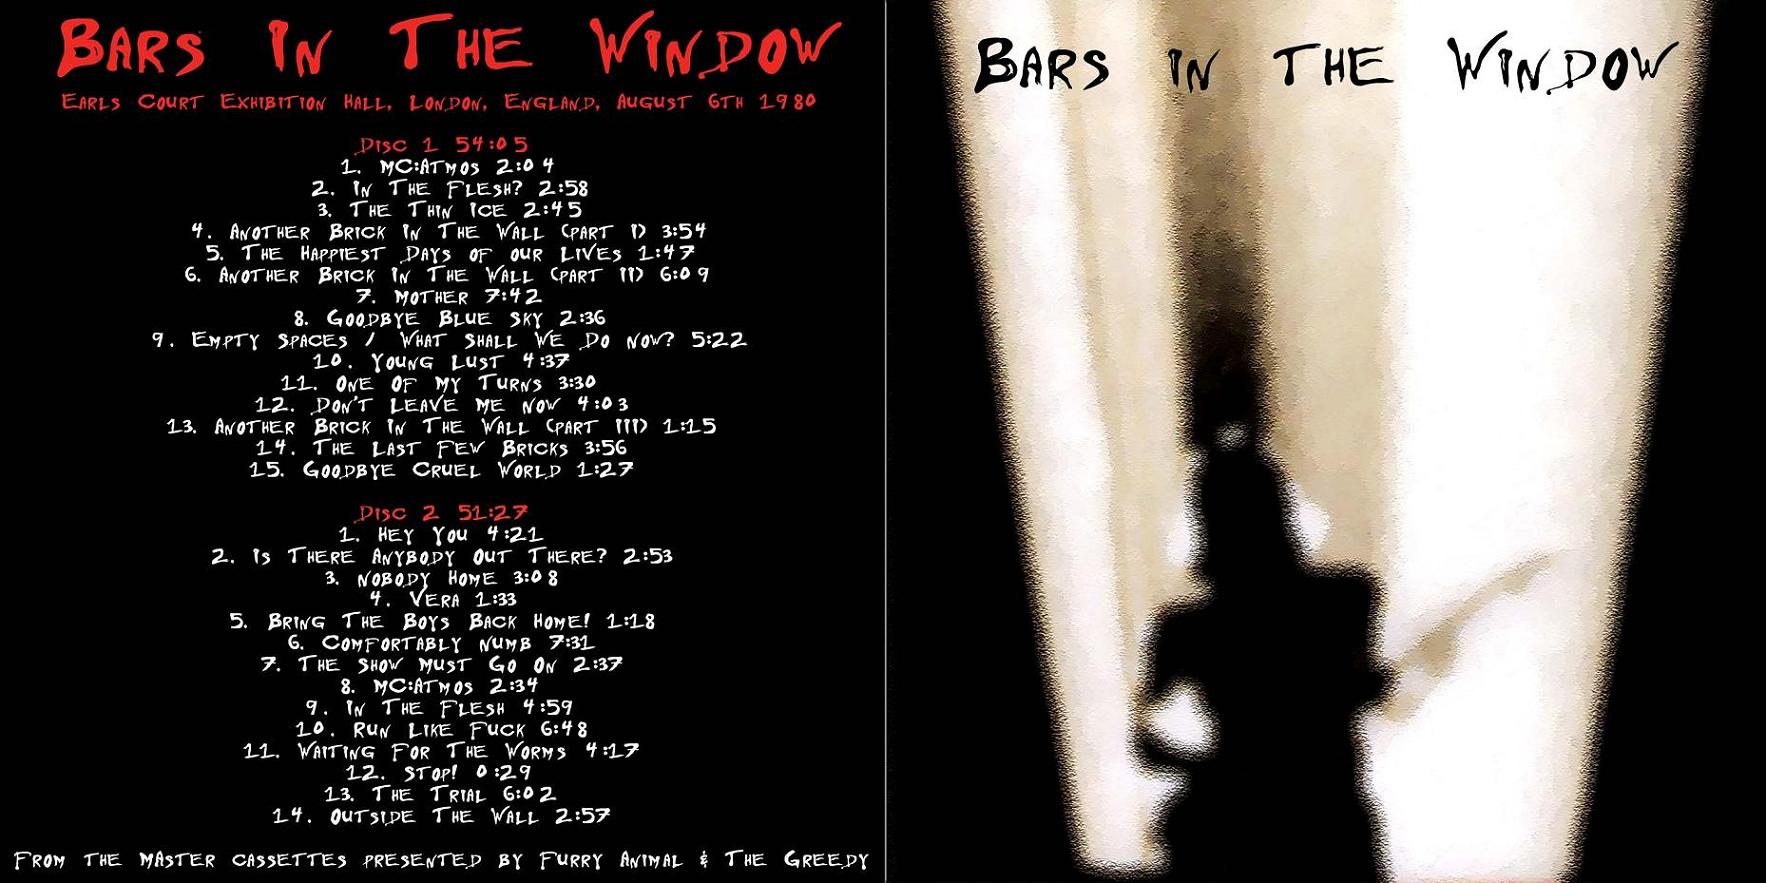 1980-08-06-Bars_in_the_window-front